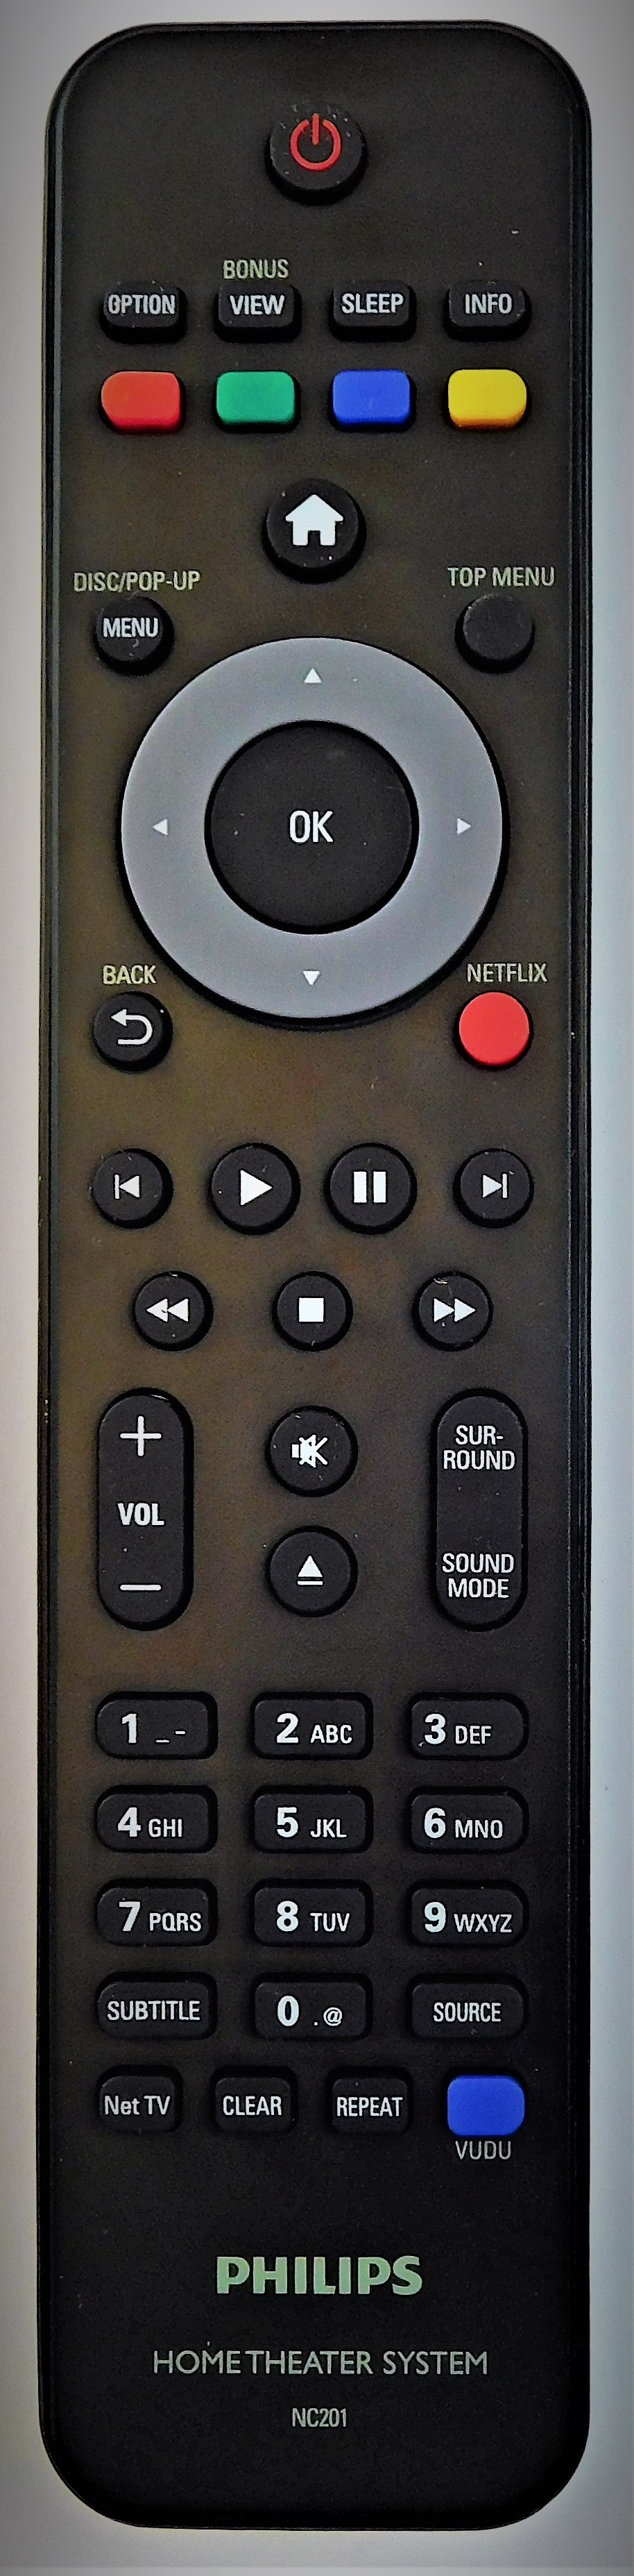 Original OEM replacement remote for Philips Home Theater System NC201UD